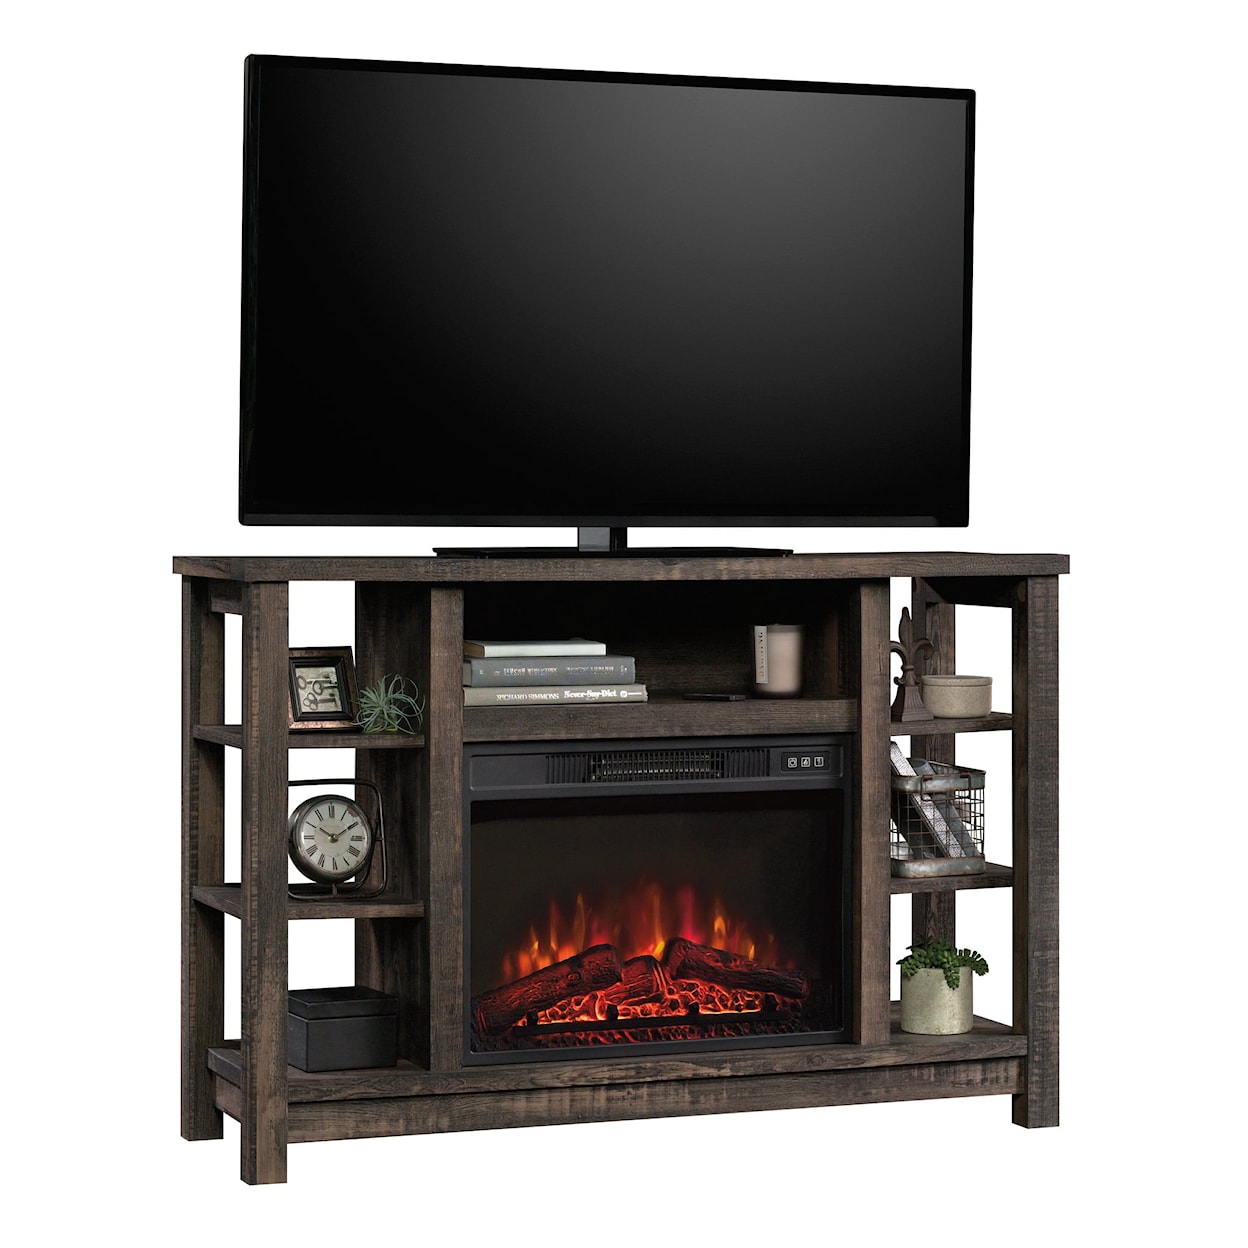 Sauder Misc Entertainment Fireplace TV Stand Credenza